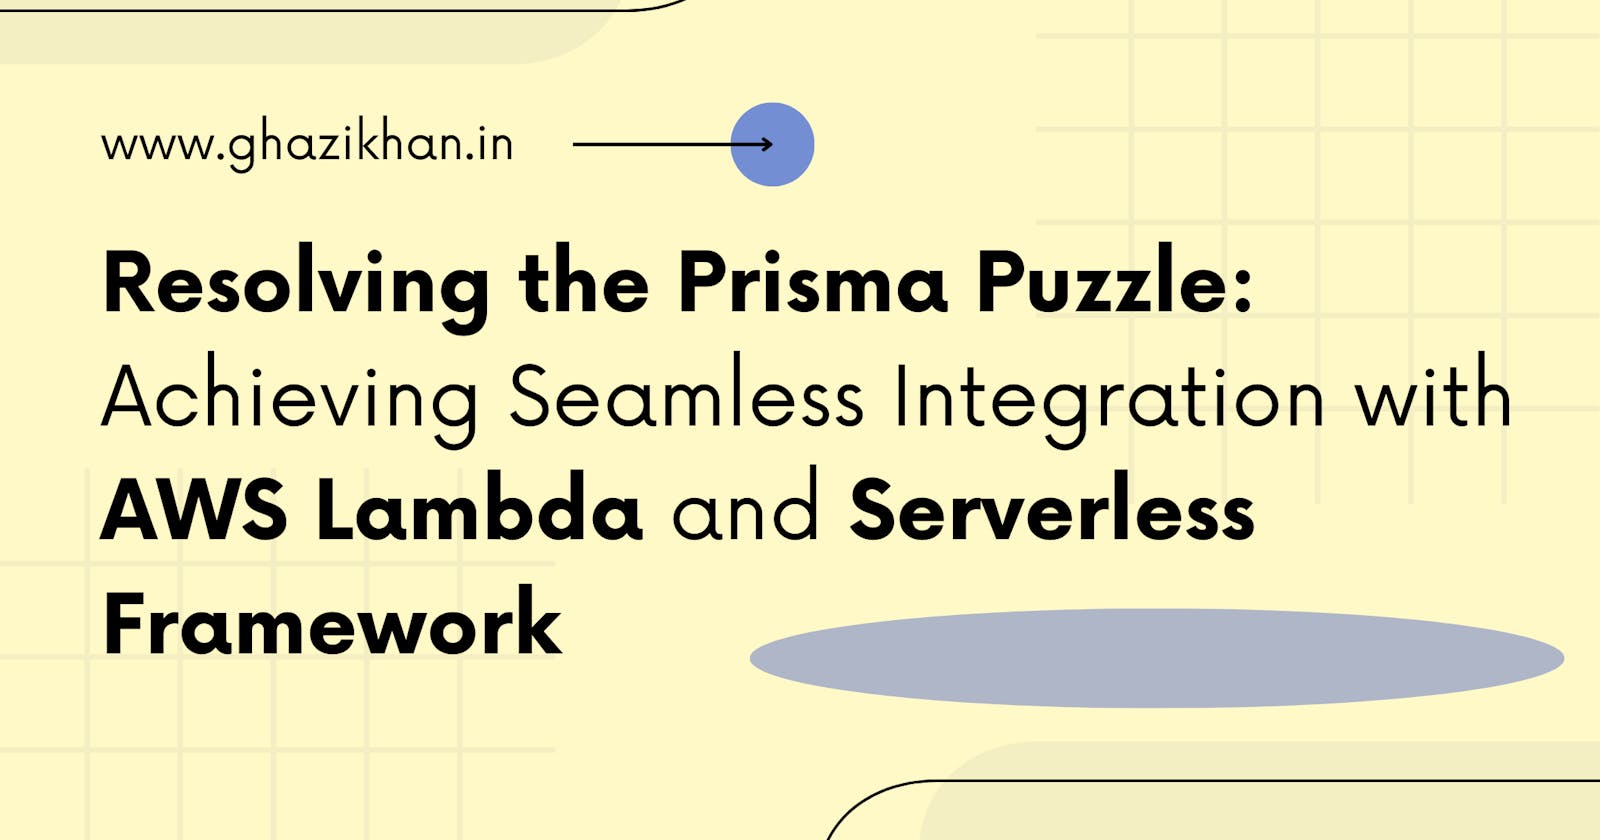 Resolving the Prisma Puzzle: Achieving Seamless Integration with AWS Lambda and Serverless Framework